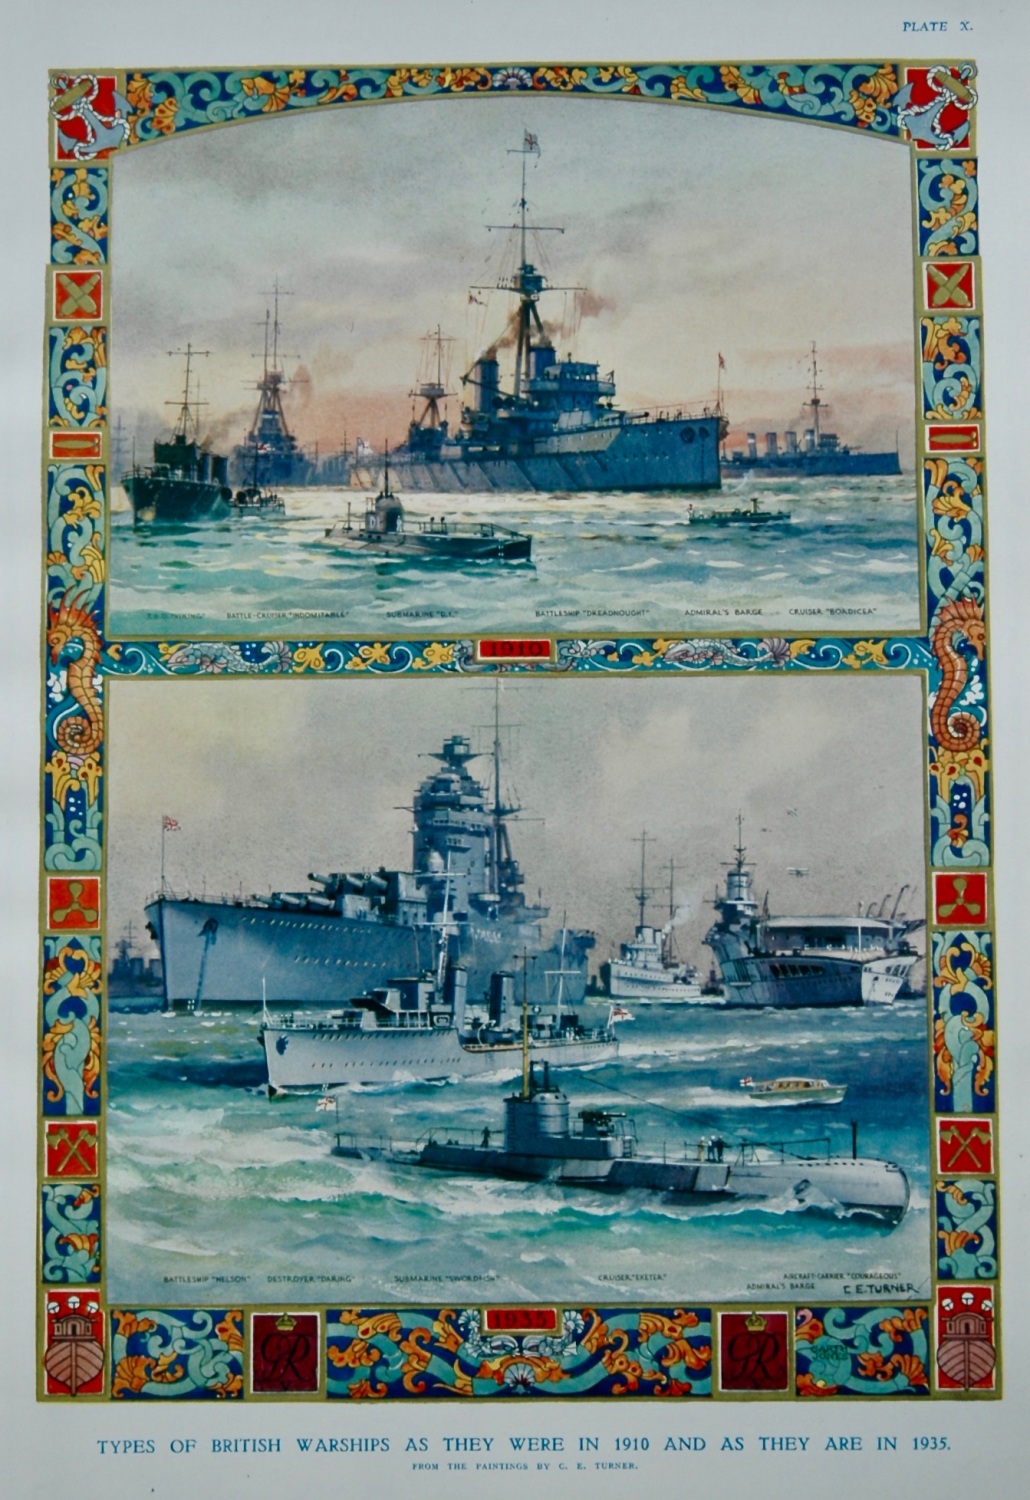 Types of British Warships as they were in 1910 and as they are in 1935. (Fr